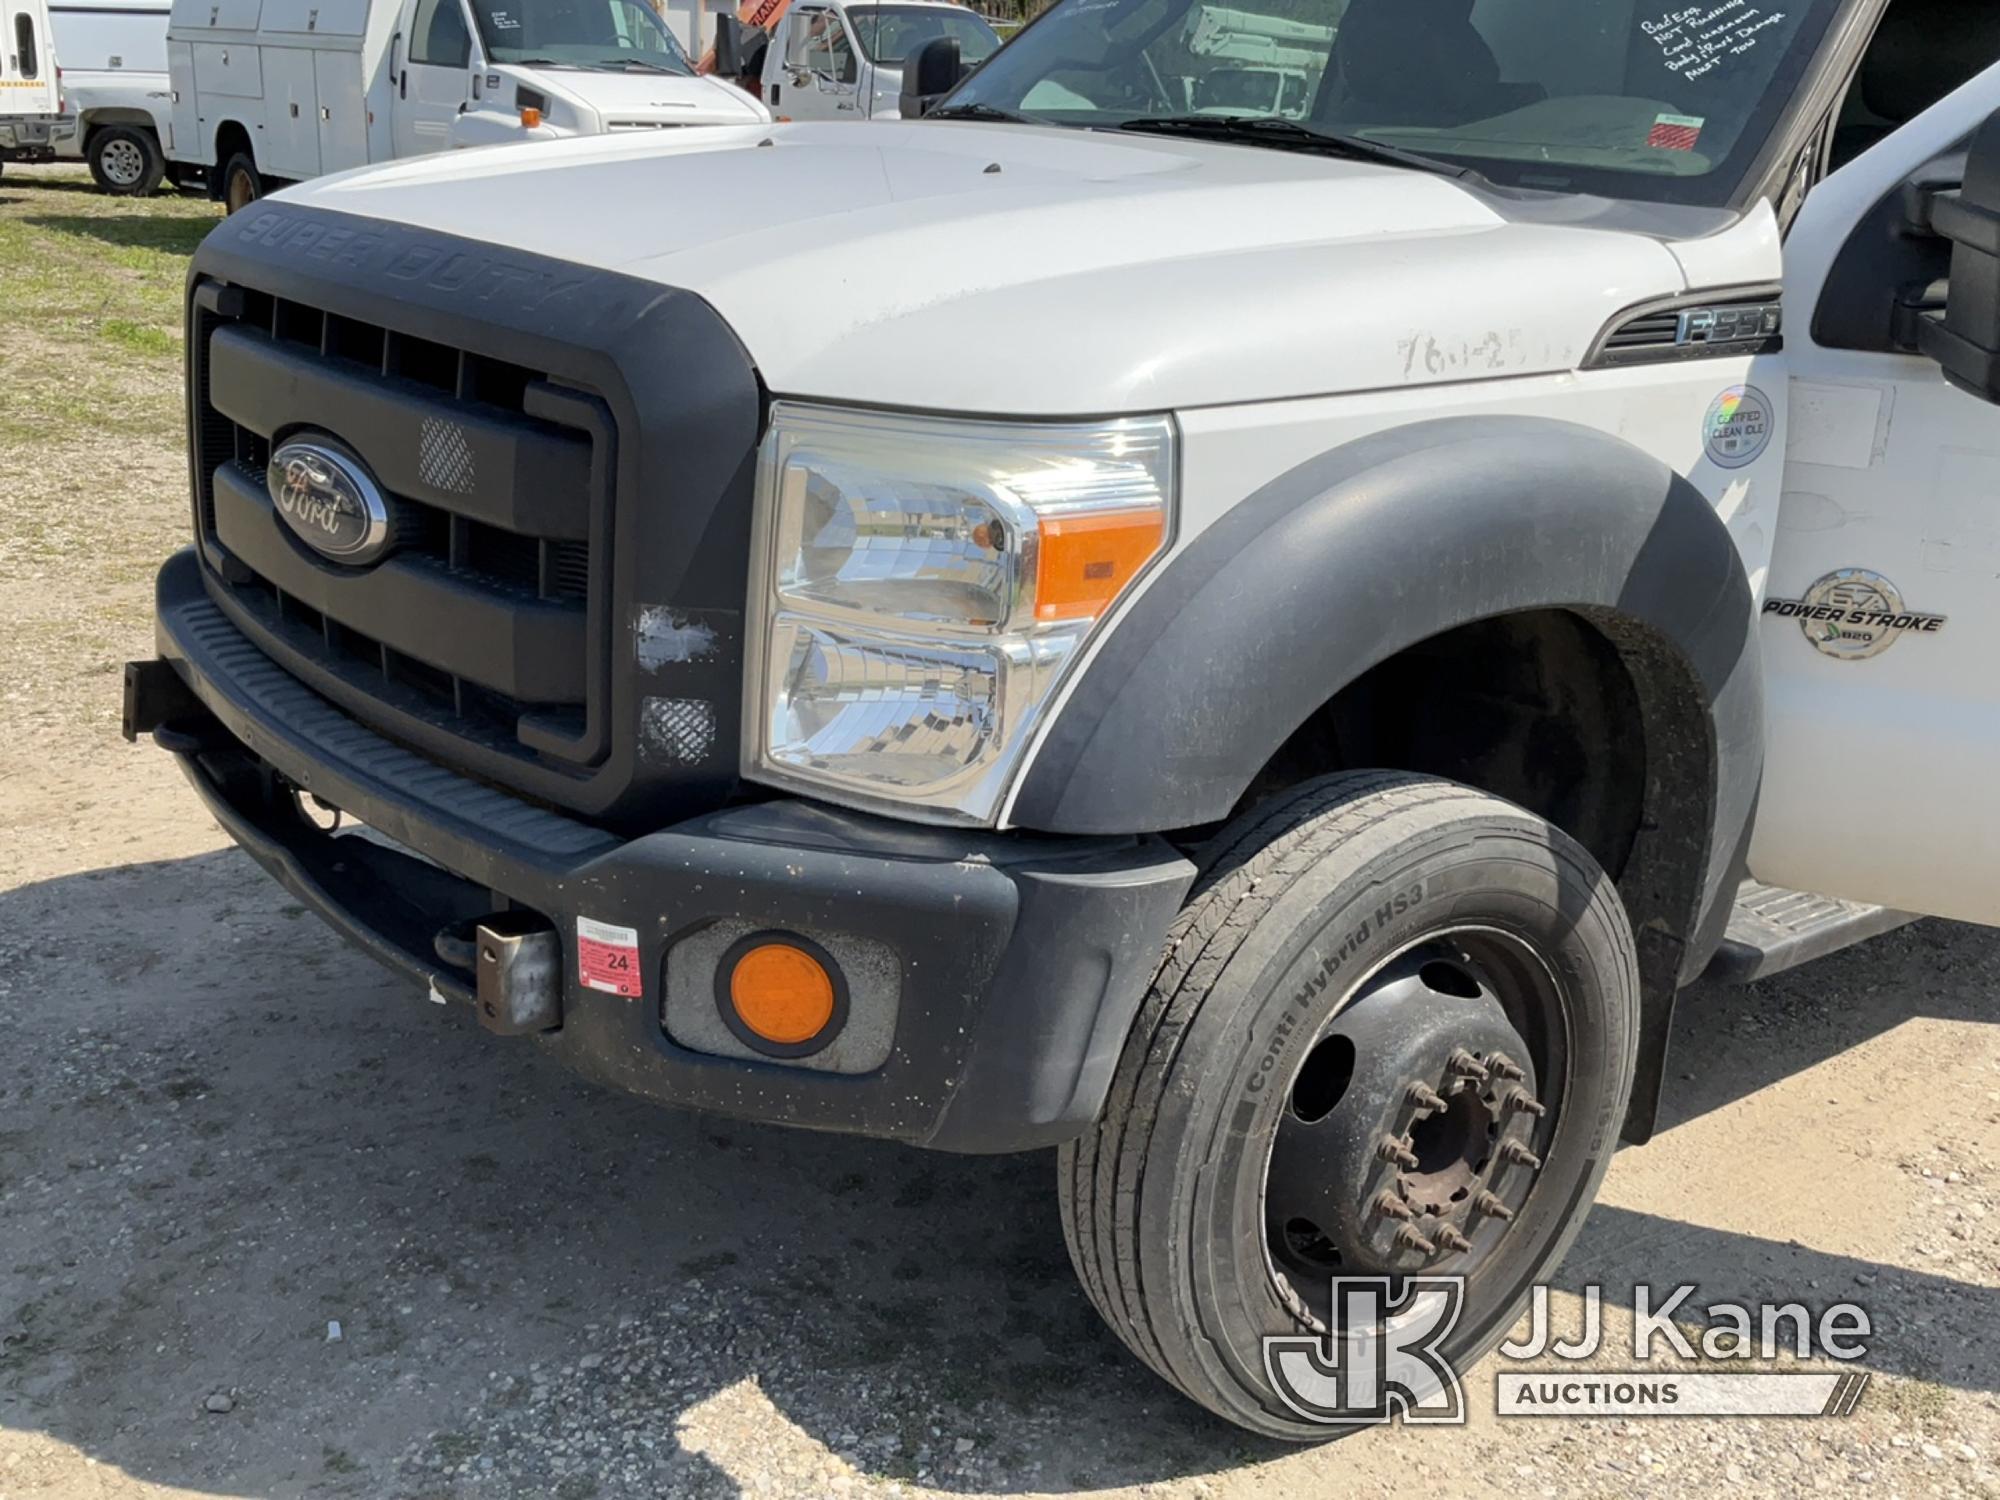 (Bellport, NY) 2012 Ford F550 Enclosed High-Top Service Truck Not Running, Condition Unknown, Bad En